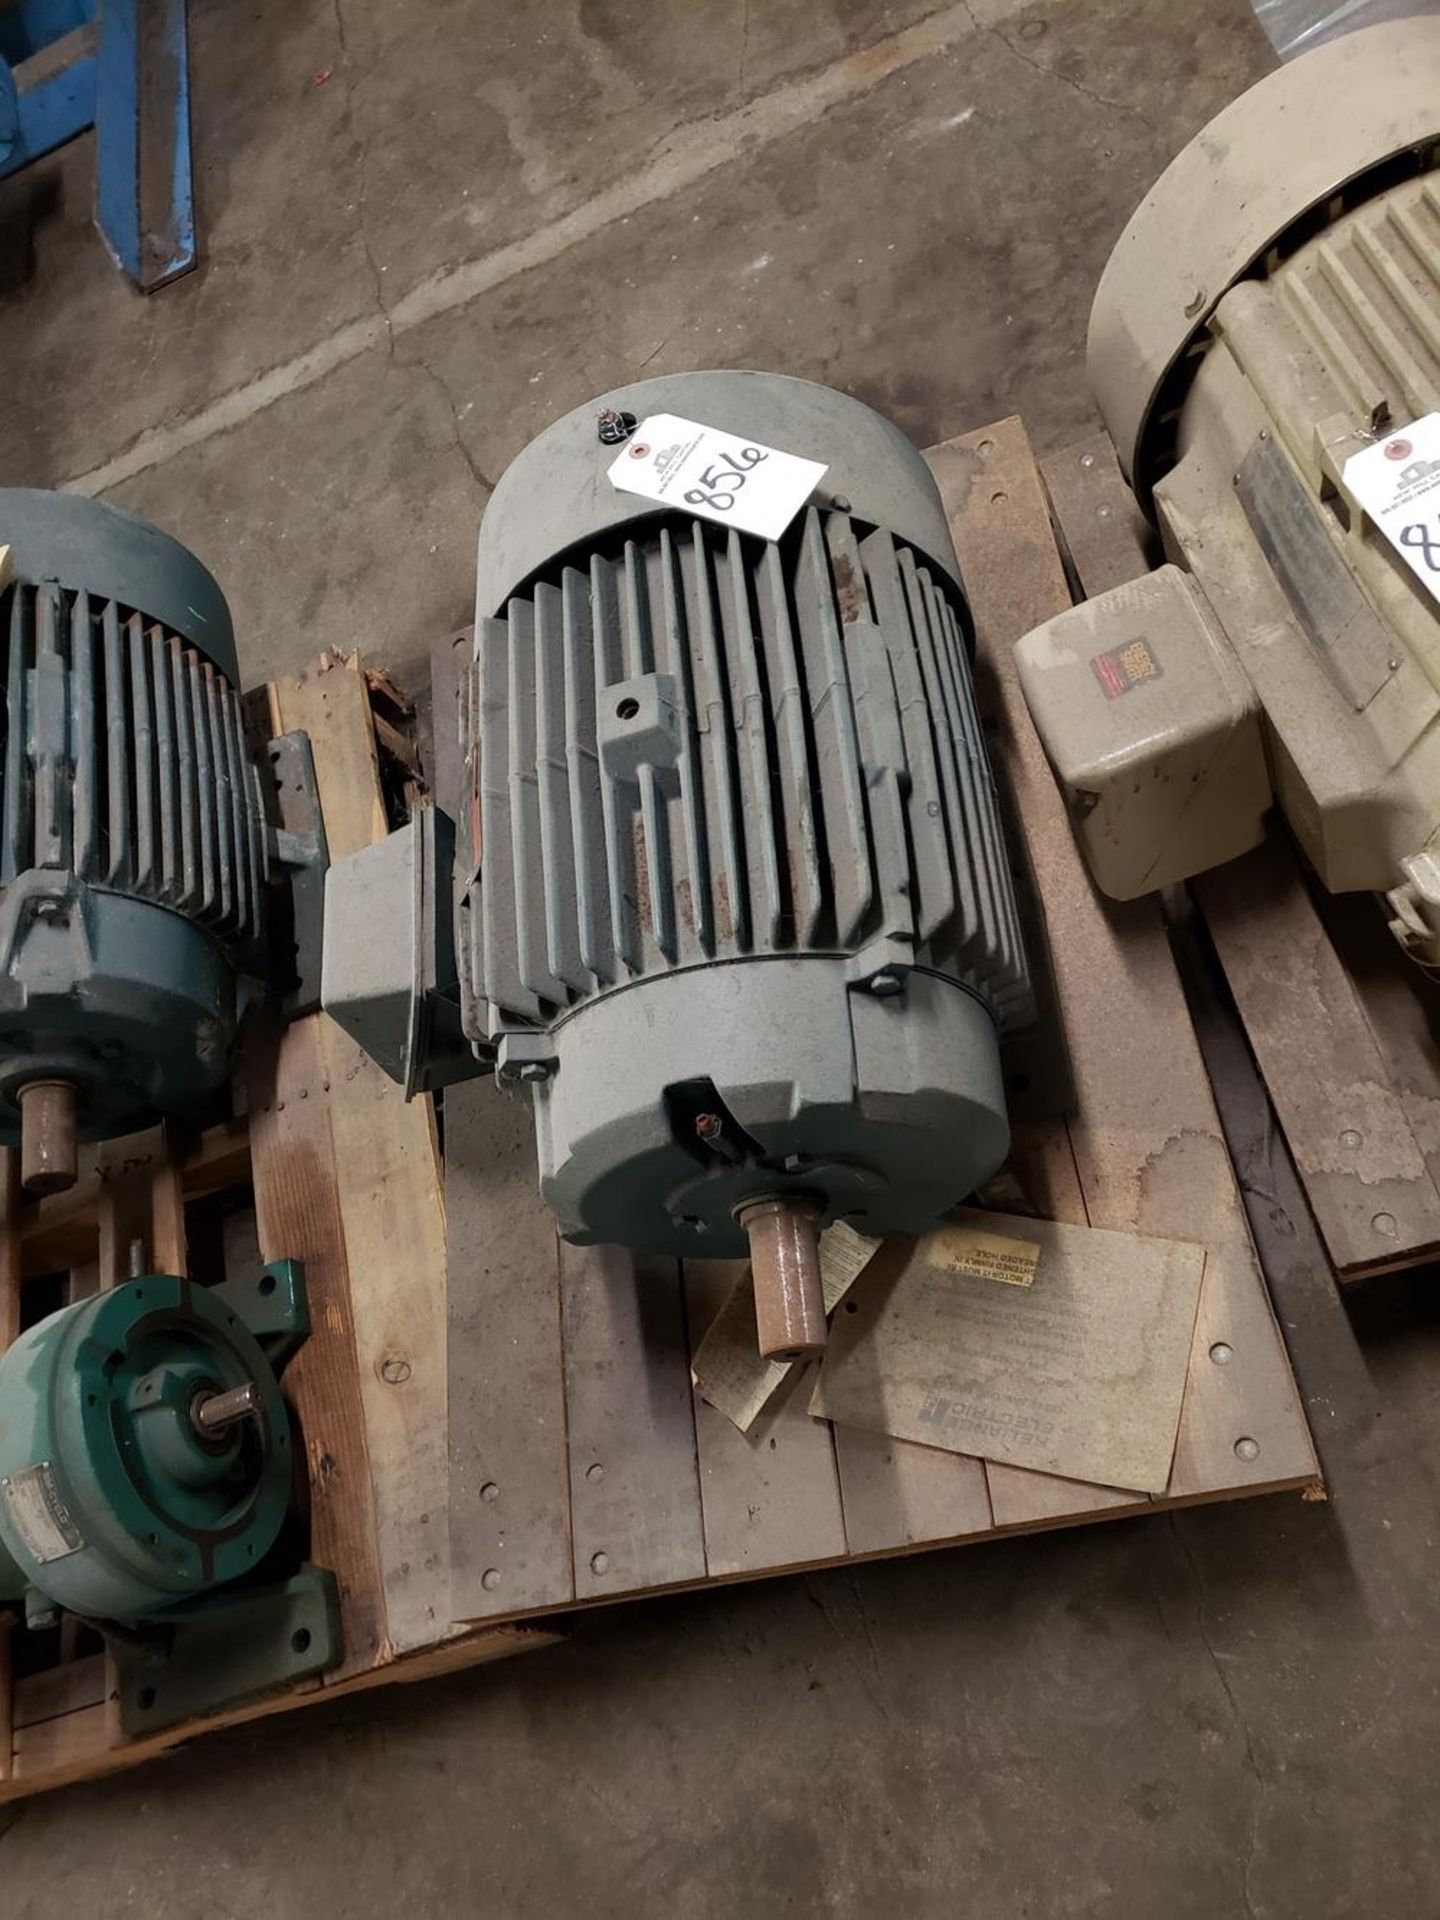 Reliance Eledctric Motor, 25 HP - Subject to Bulk Bid Lot 845B -The Greater of | Rig Fee: No Charge